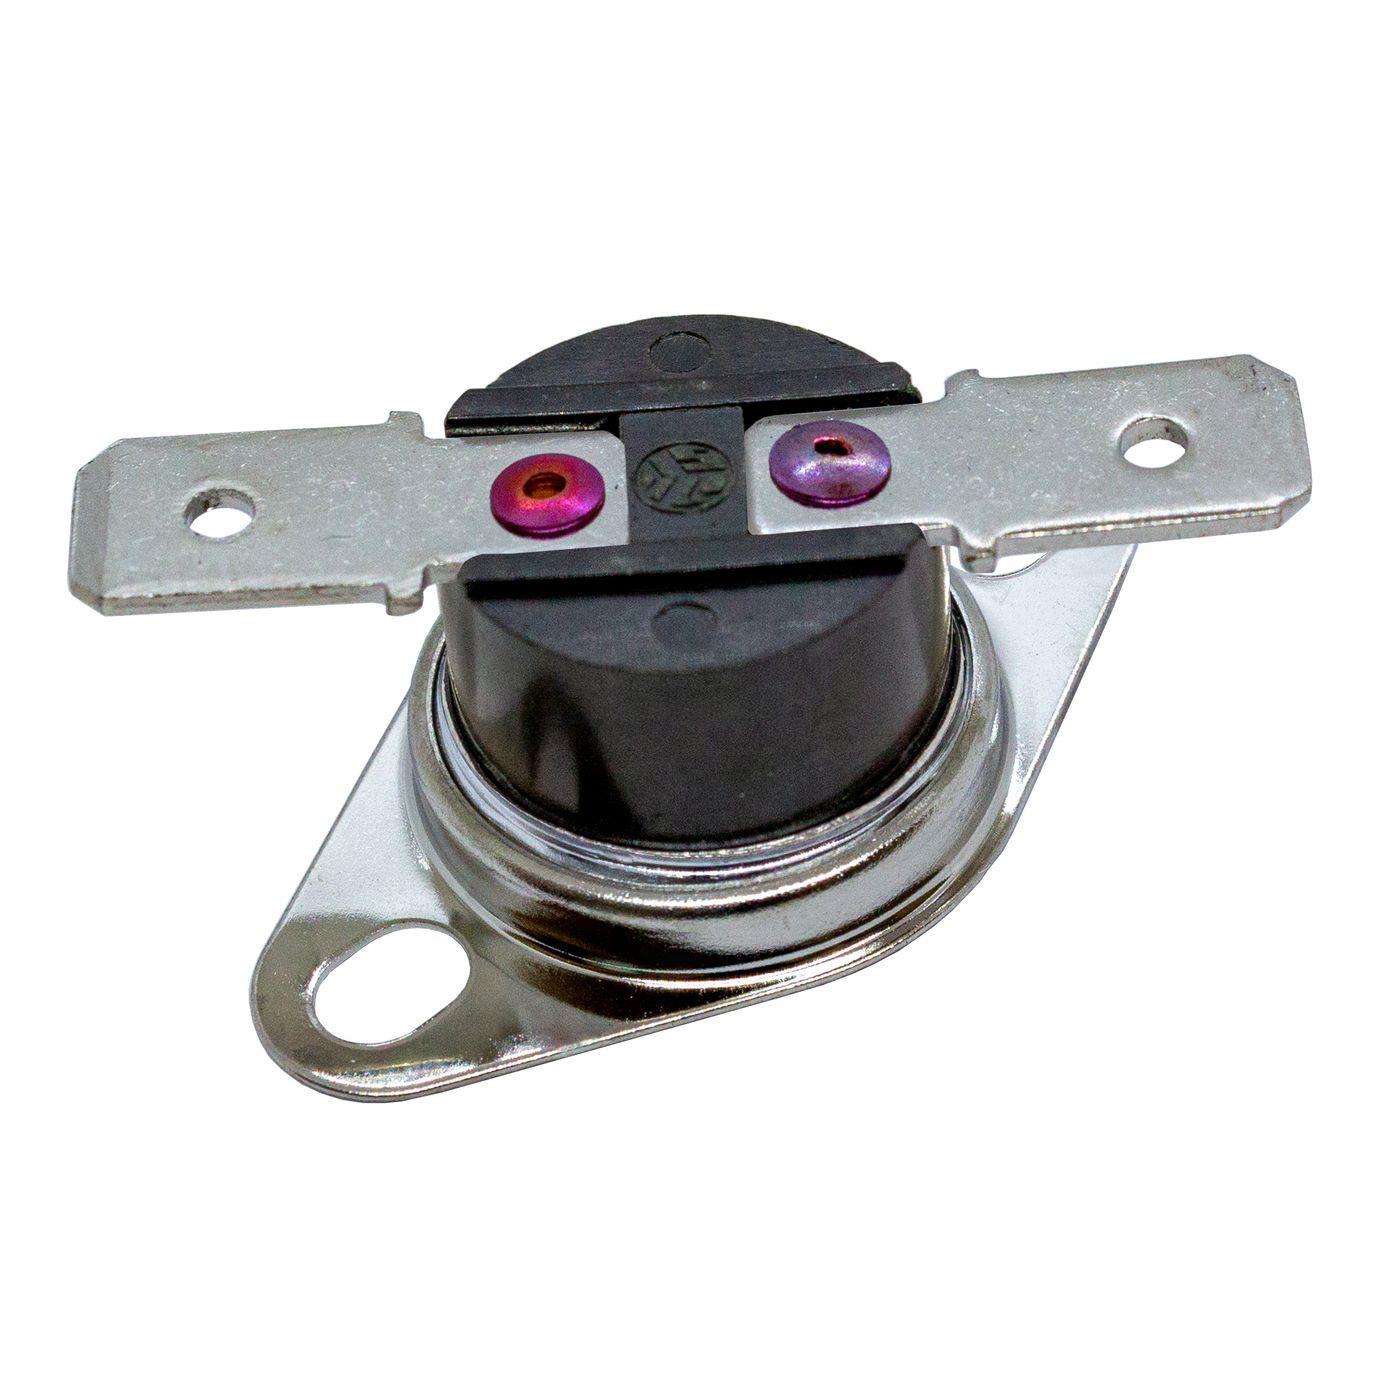 Thermal switch 60°C NO contact 250V 10A Temperature switch thermostat KSD301 Bimetal Thermal protection